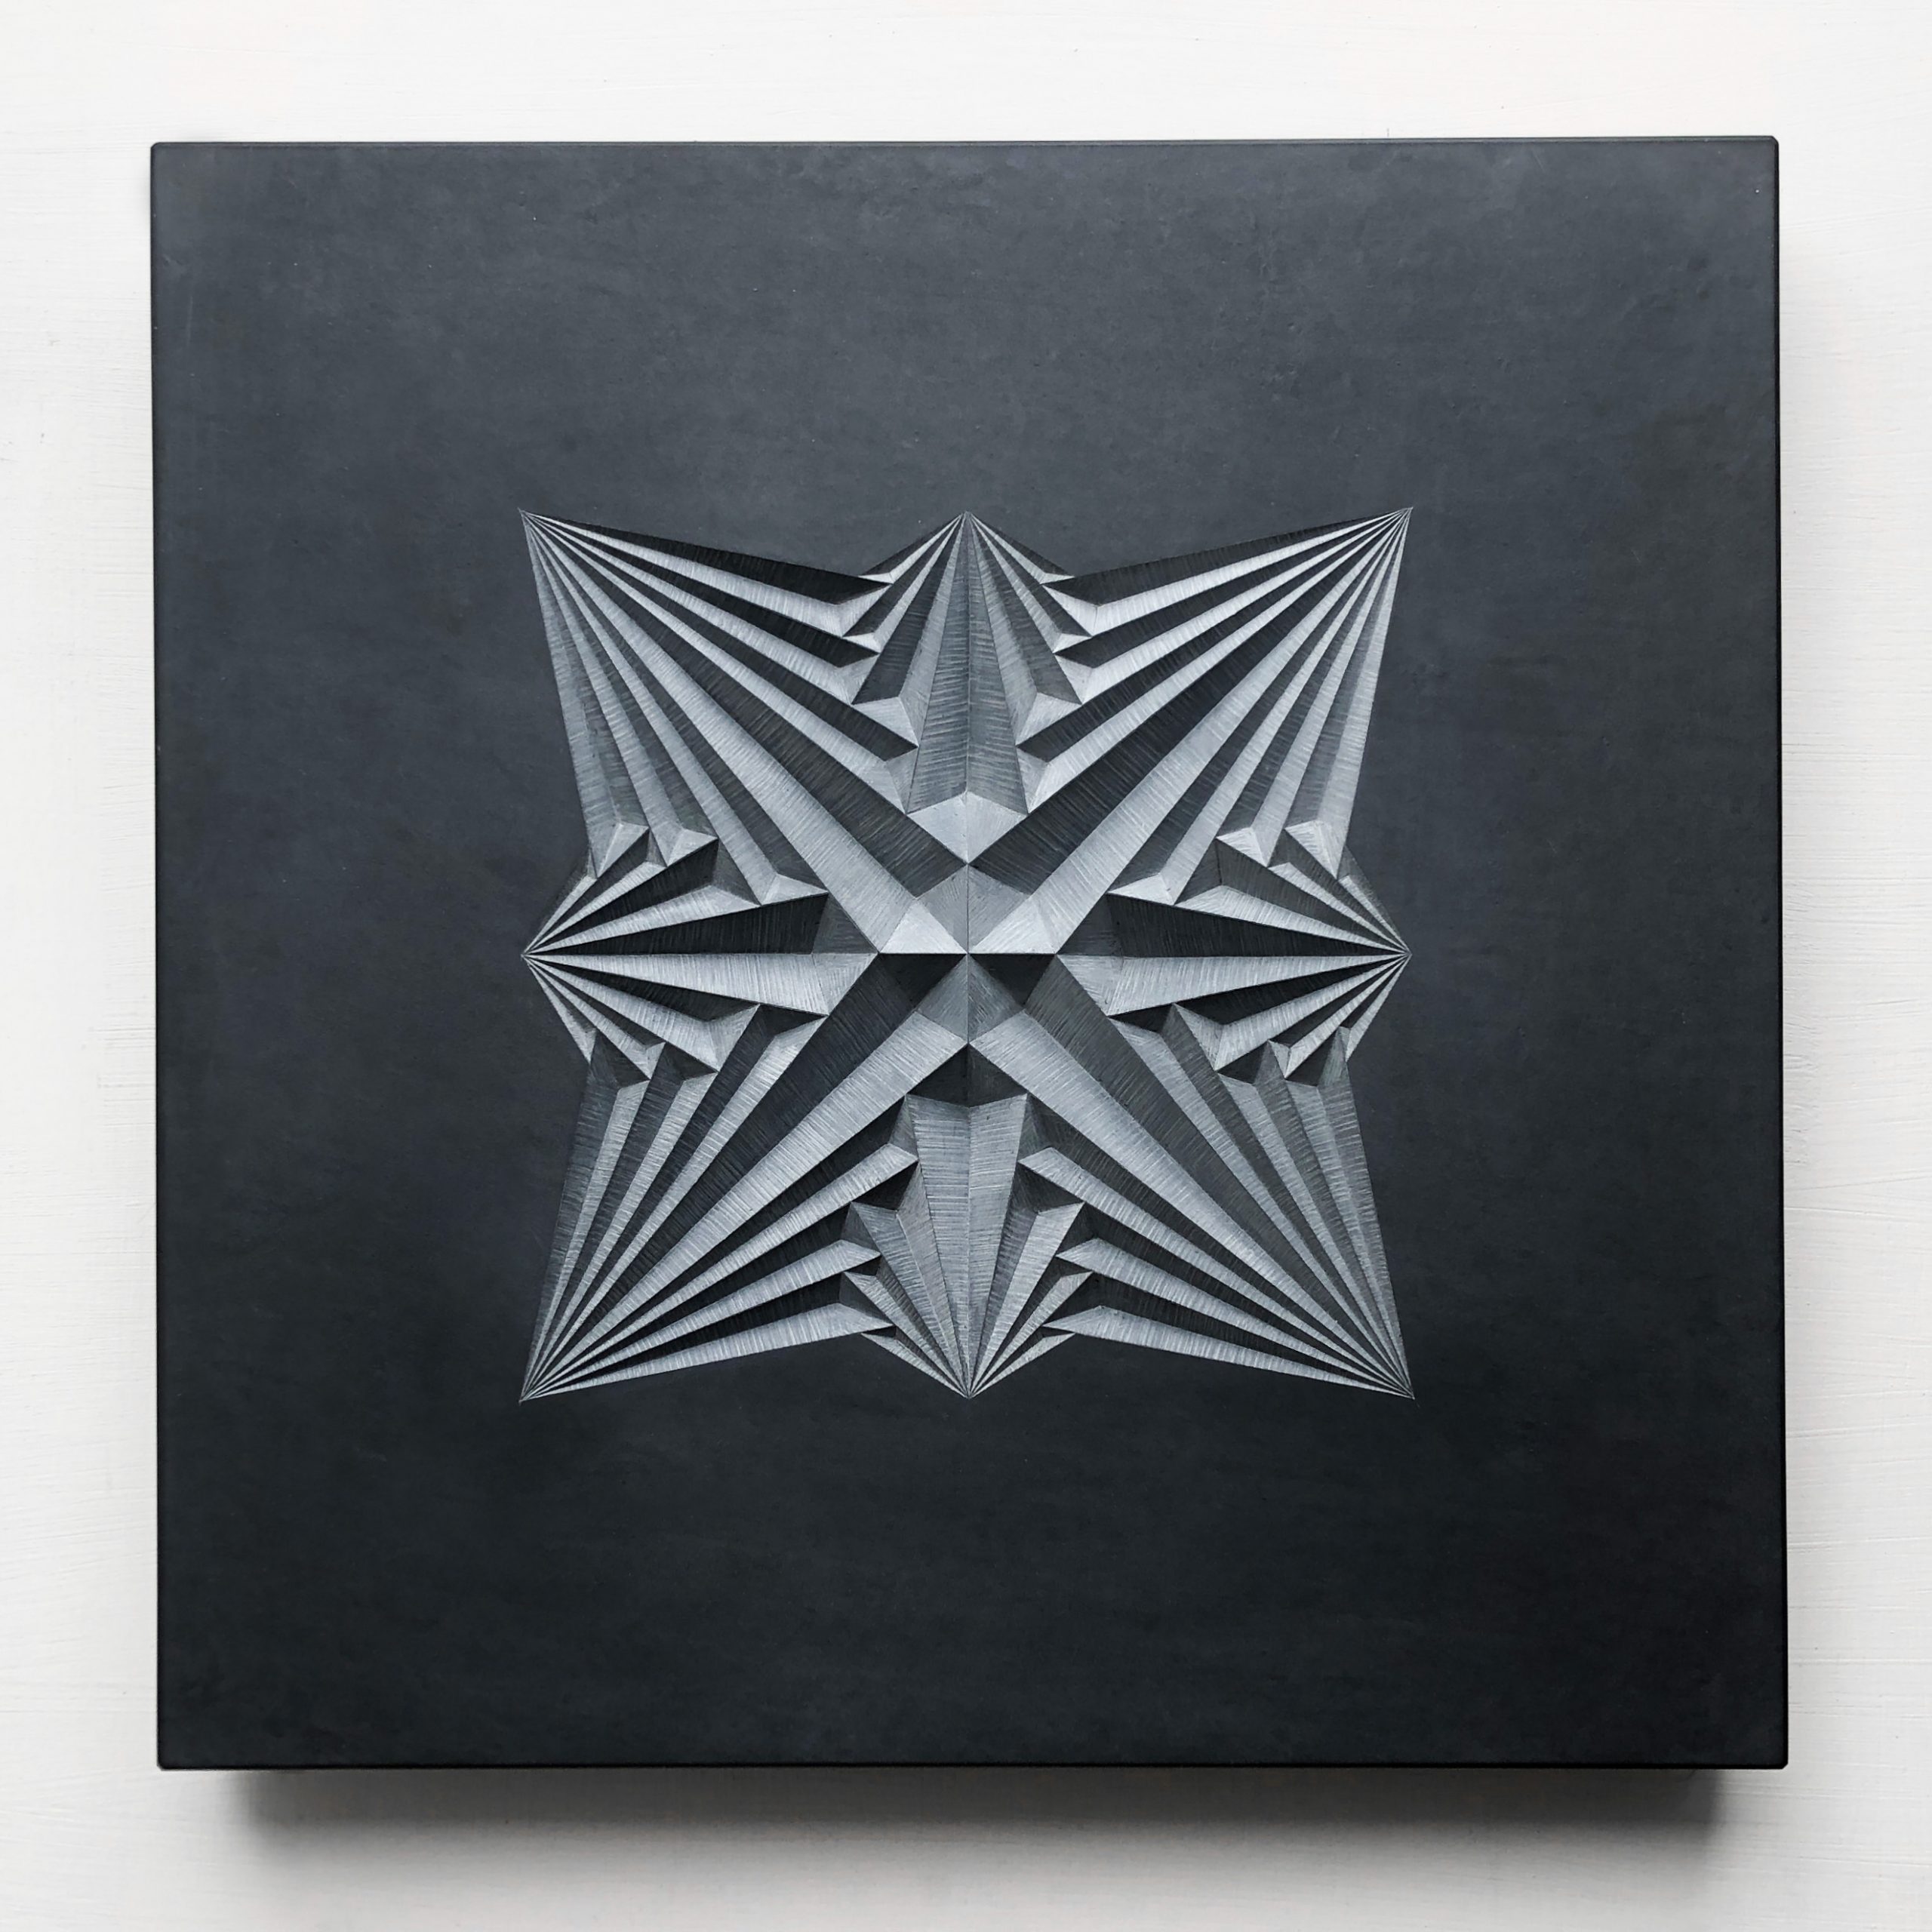 Geometric patter carving into welsh slate by Zoe Wilson